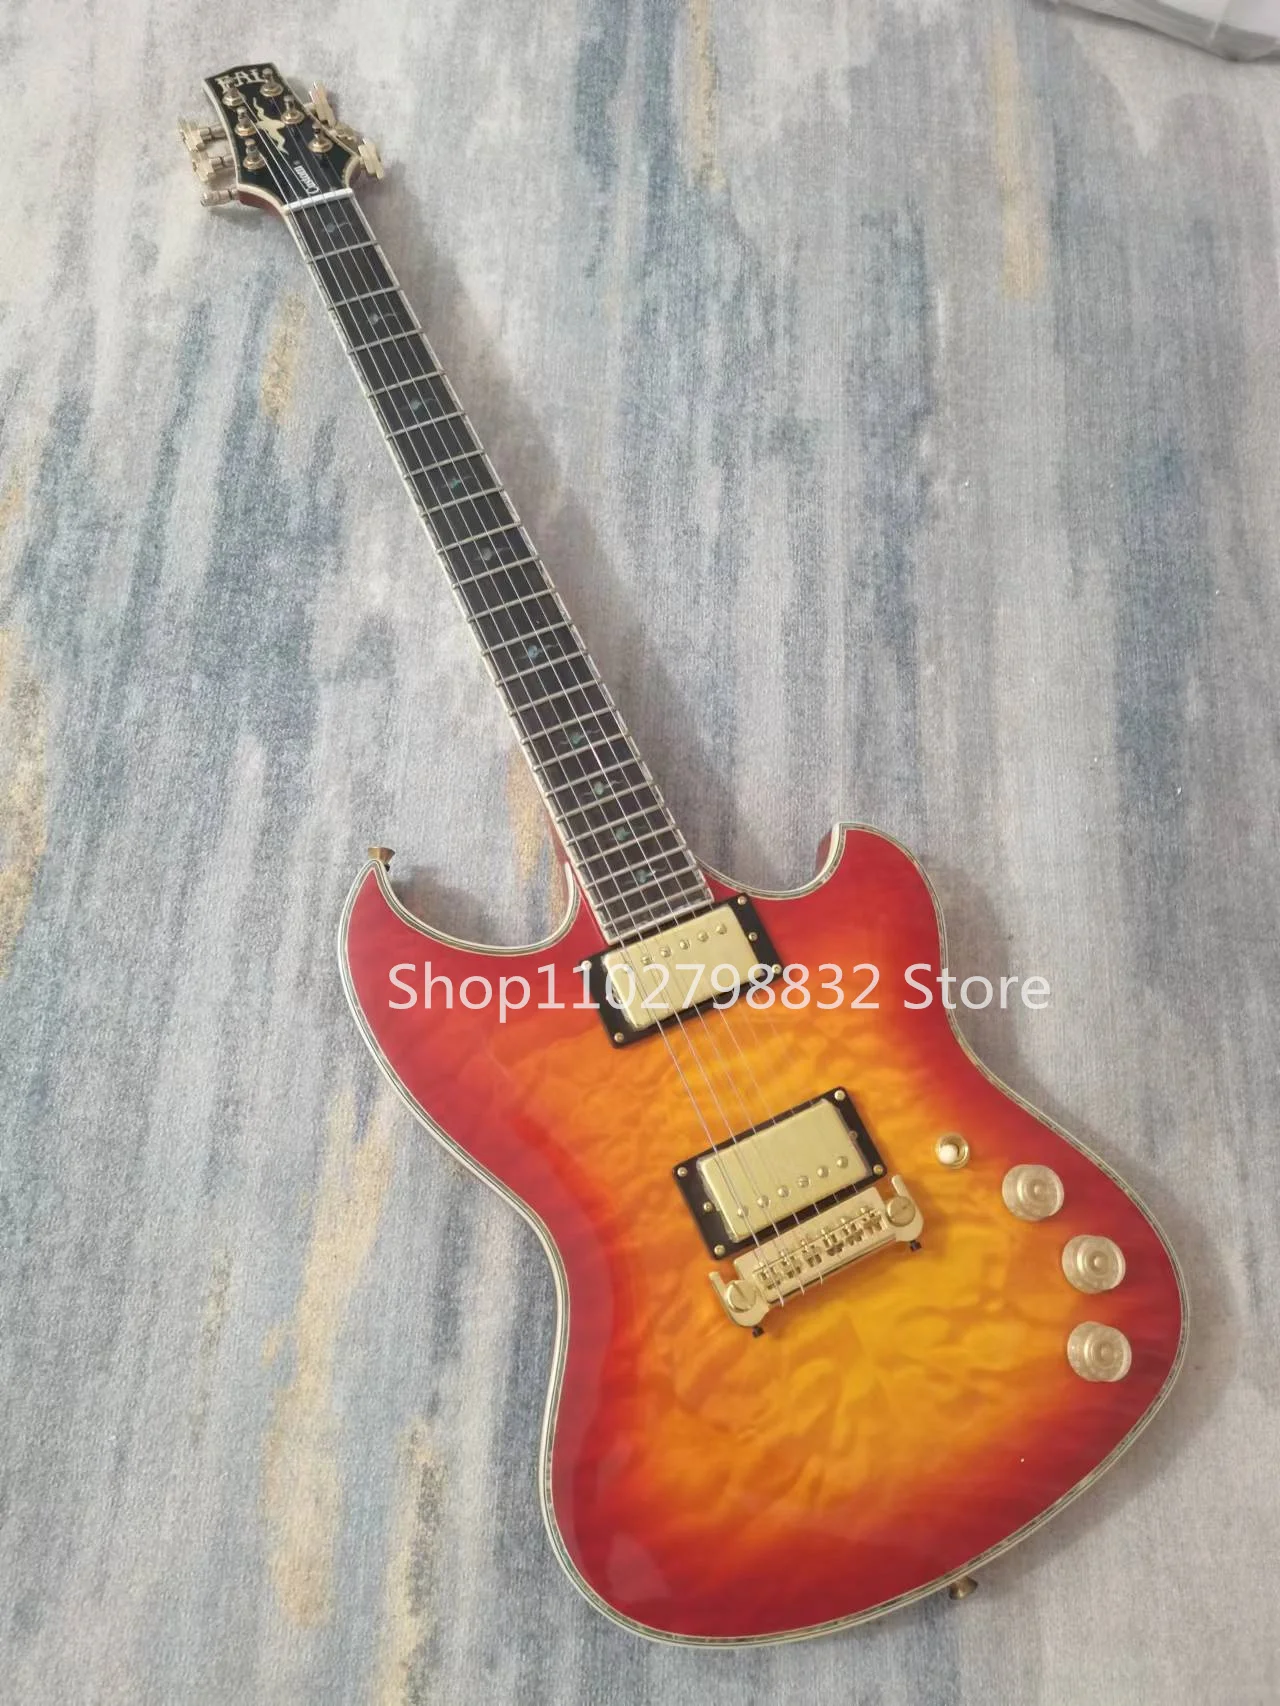 

6-string electric guitar, Rose Wood fingerboard, colorful shell inlay, inverted bridge, gold accessories, free shipping